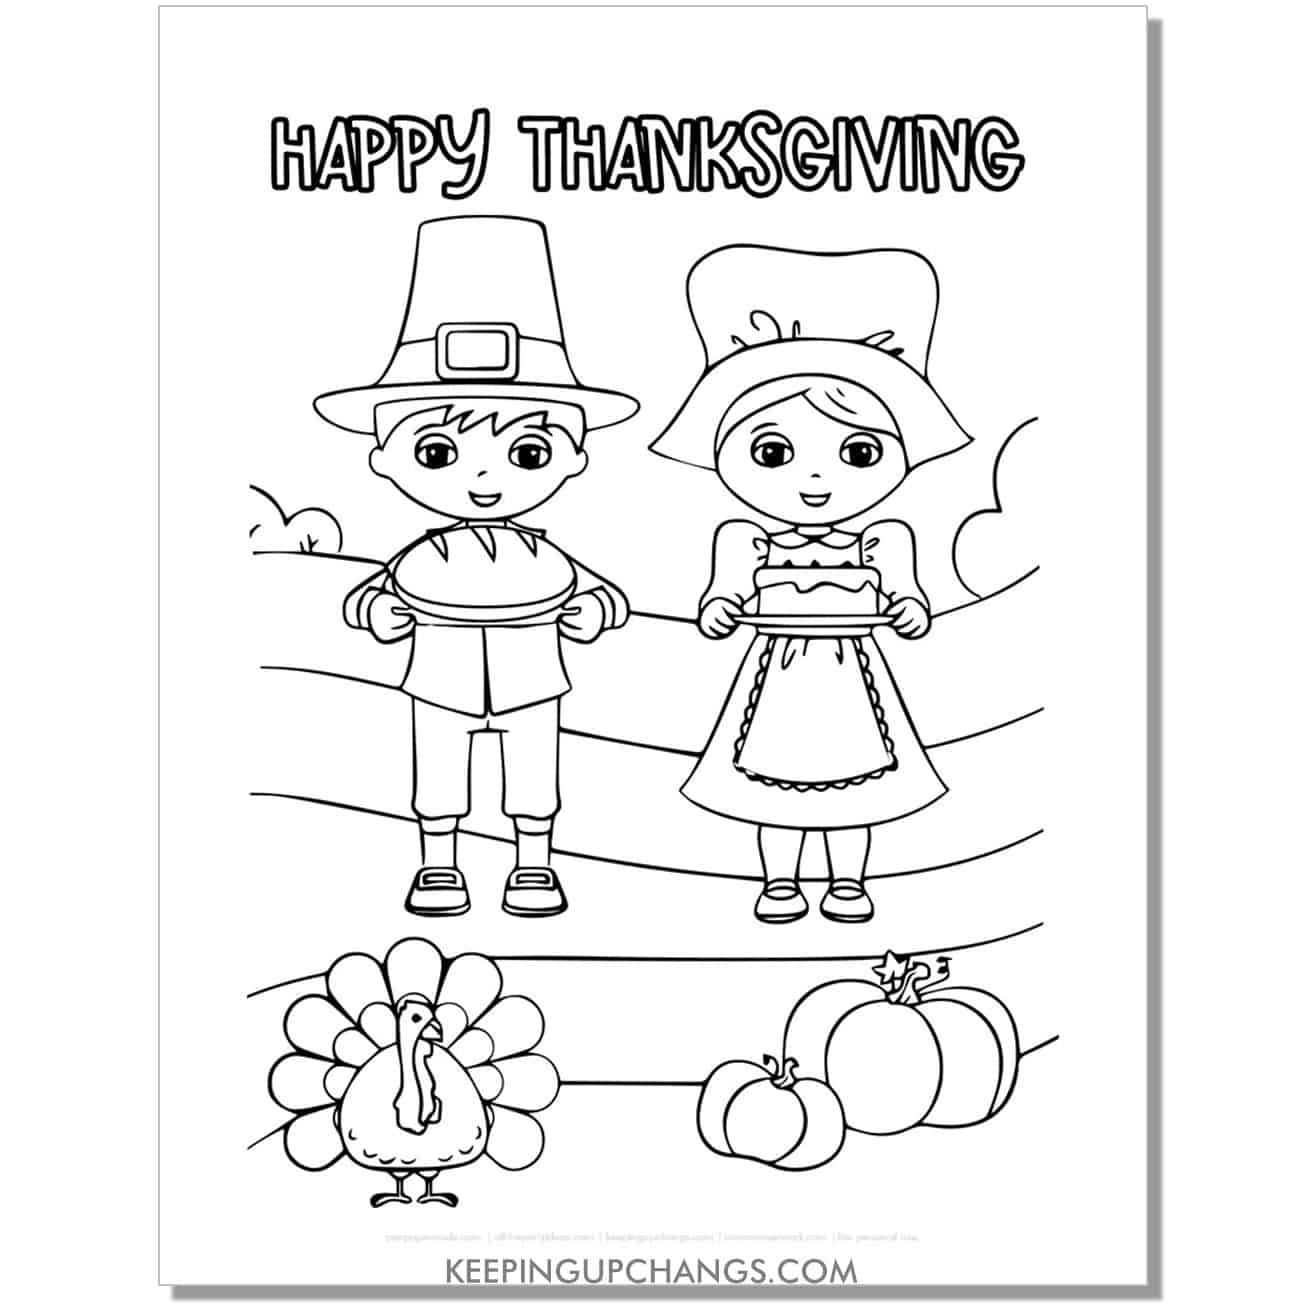 free pilgrim boy girl happy thanksgiving coloring page for fall, thanksgiving.